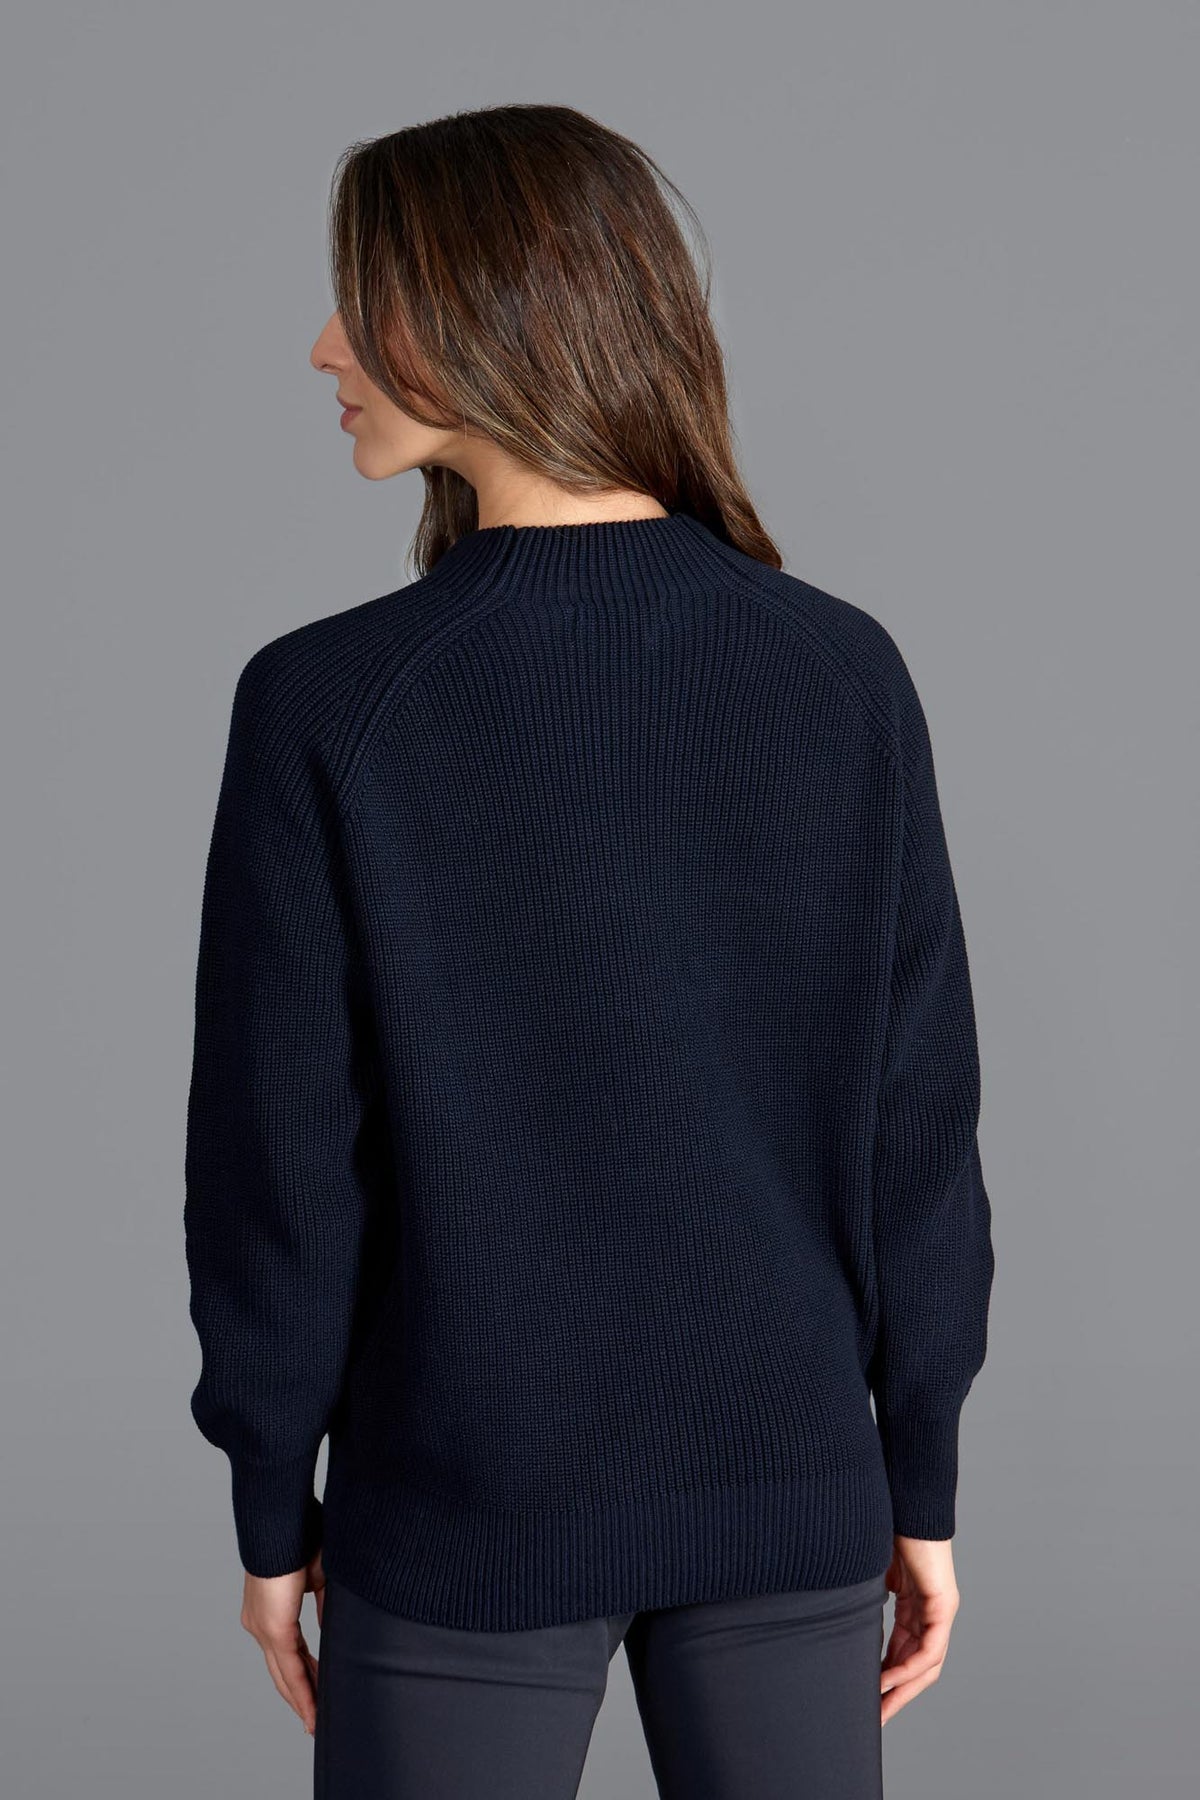 Women's High Neck Pure Cotton Ribbed Jumper – Paul James Knitwear